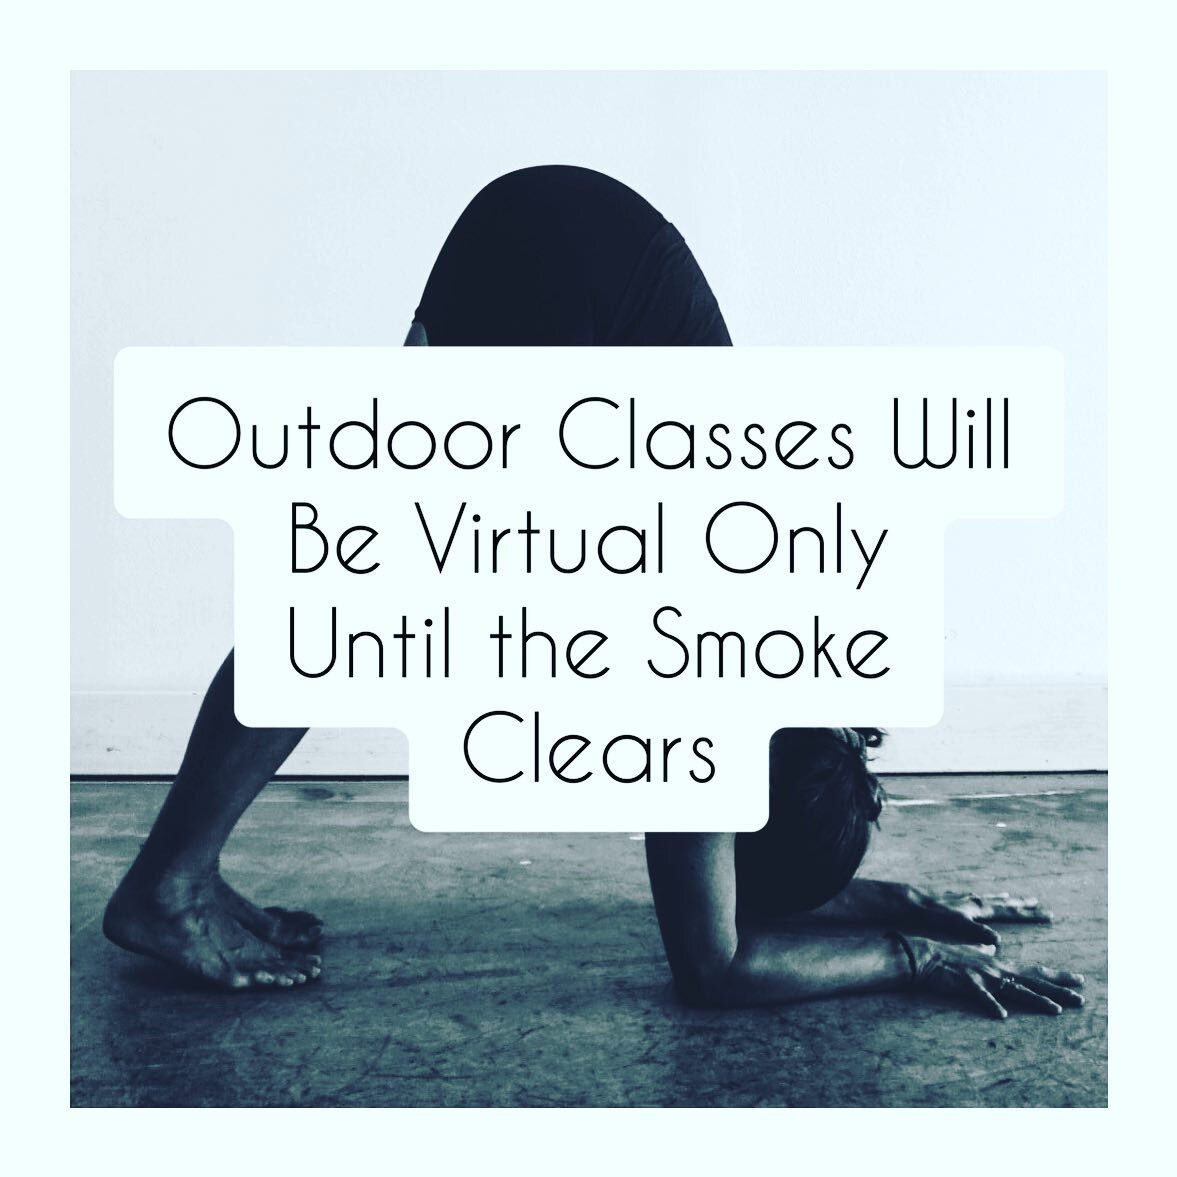 Join us from indoors in our virtual classes until it is safe to practice outside again. 
Gratitude to our firefighters helping combat these wildfires. 🙏